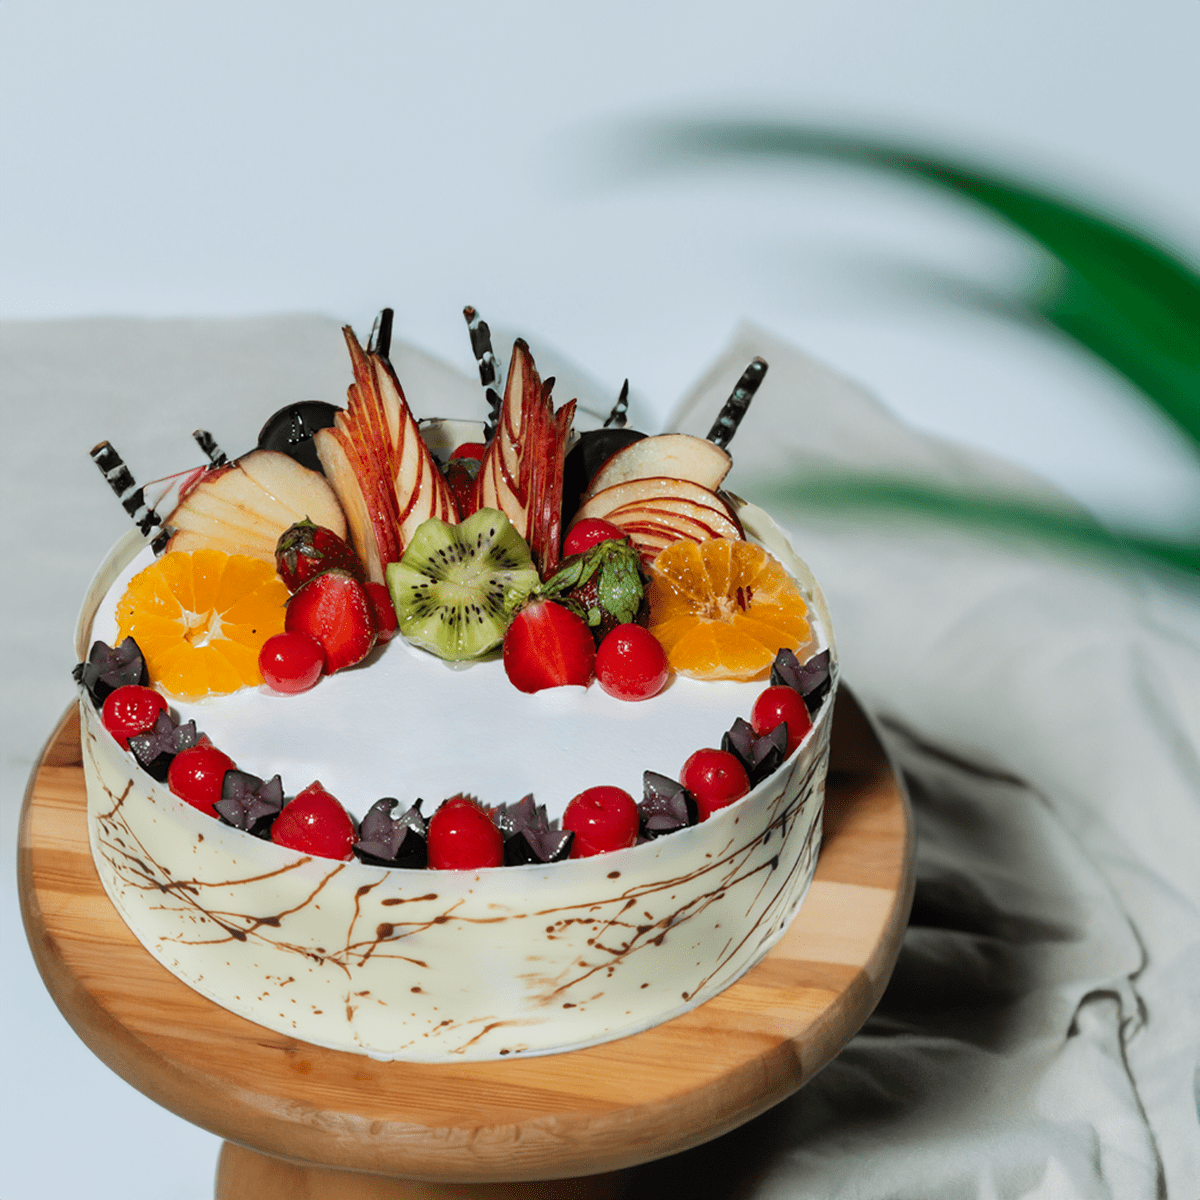 Fruit Filled Cakes You'll Love - Cake by Courtney